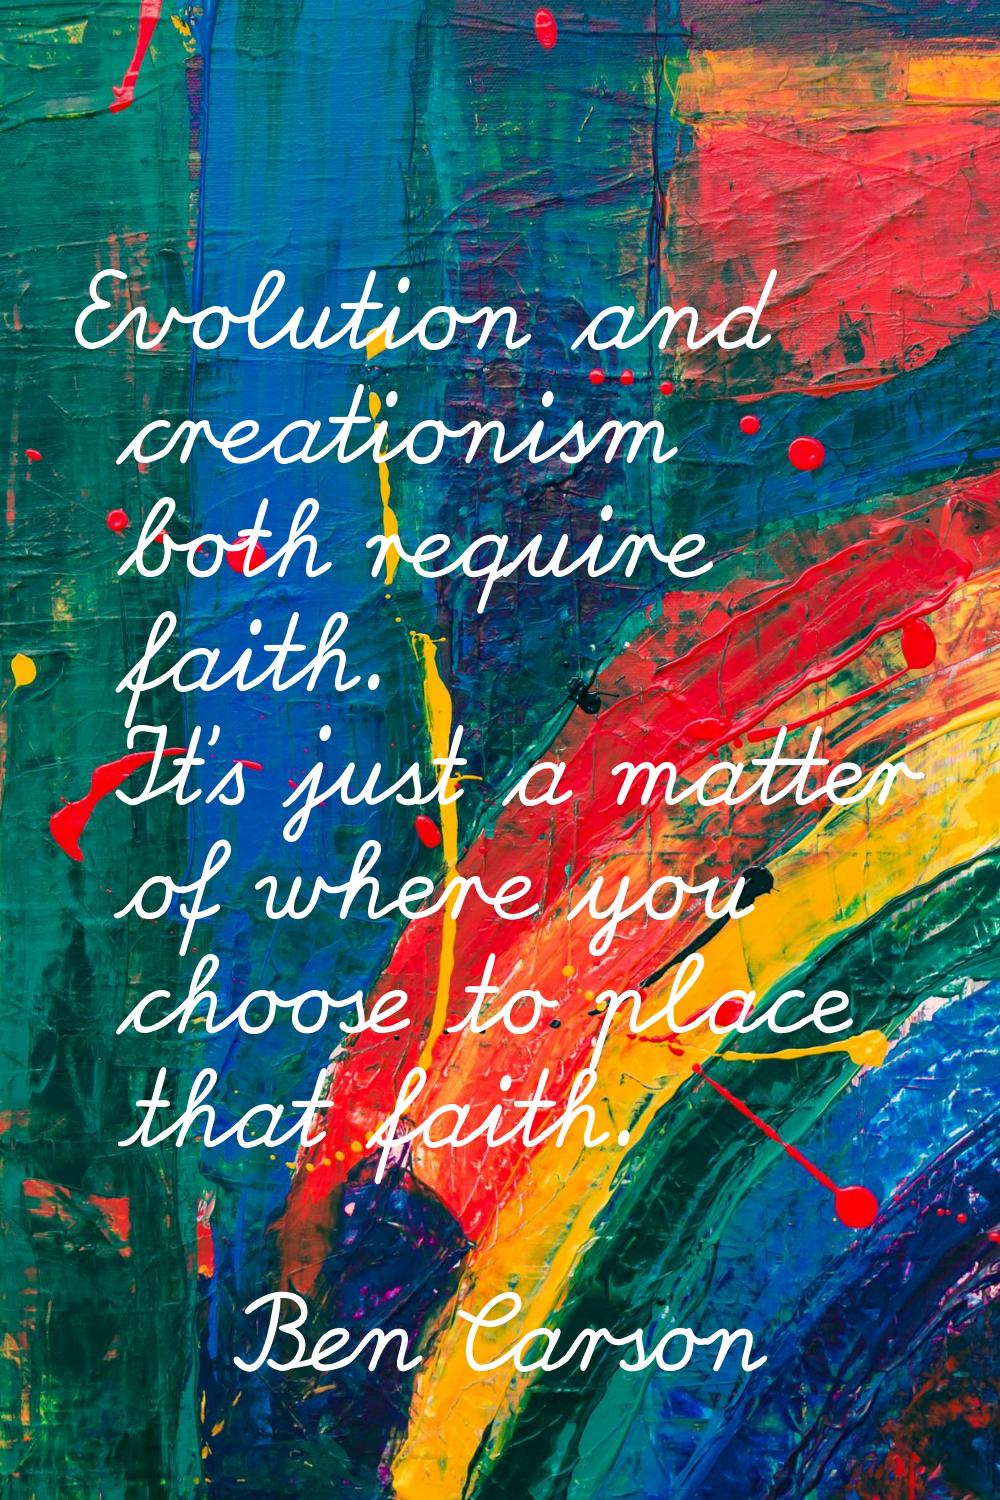 Evolution and creationism both require faith. It's just a matter of where you choose to place that 